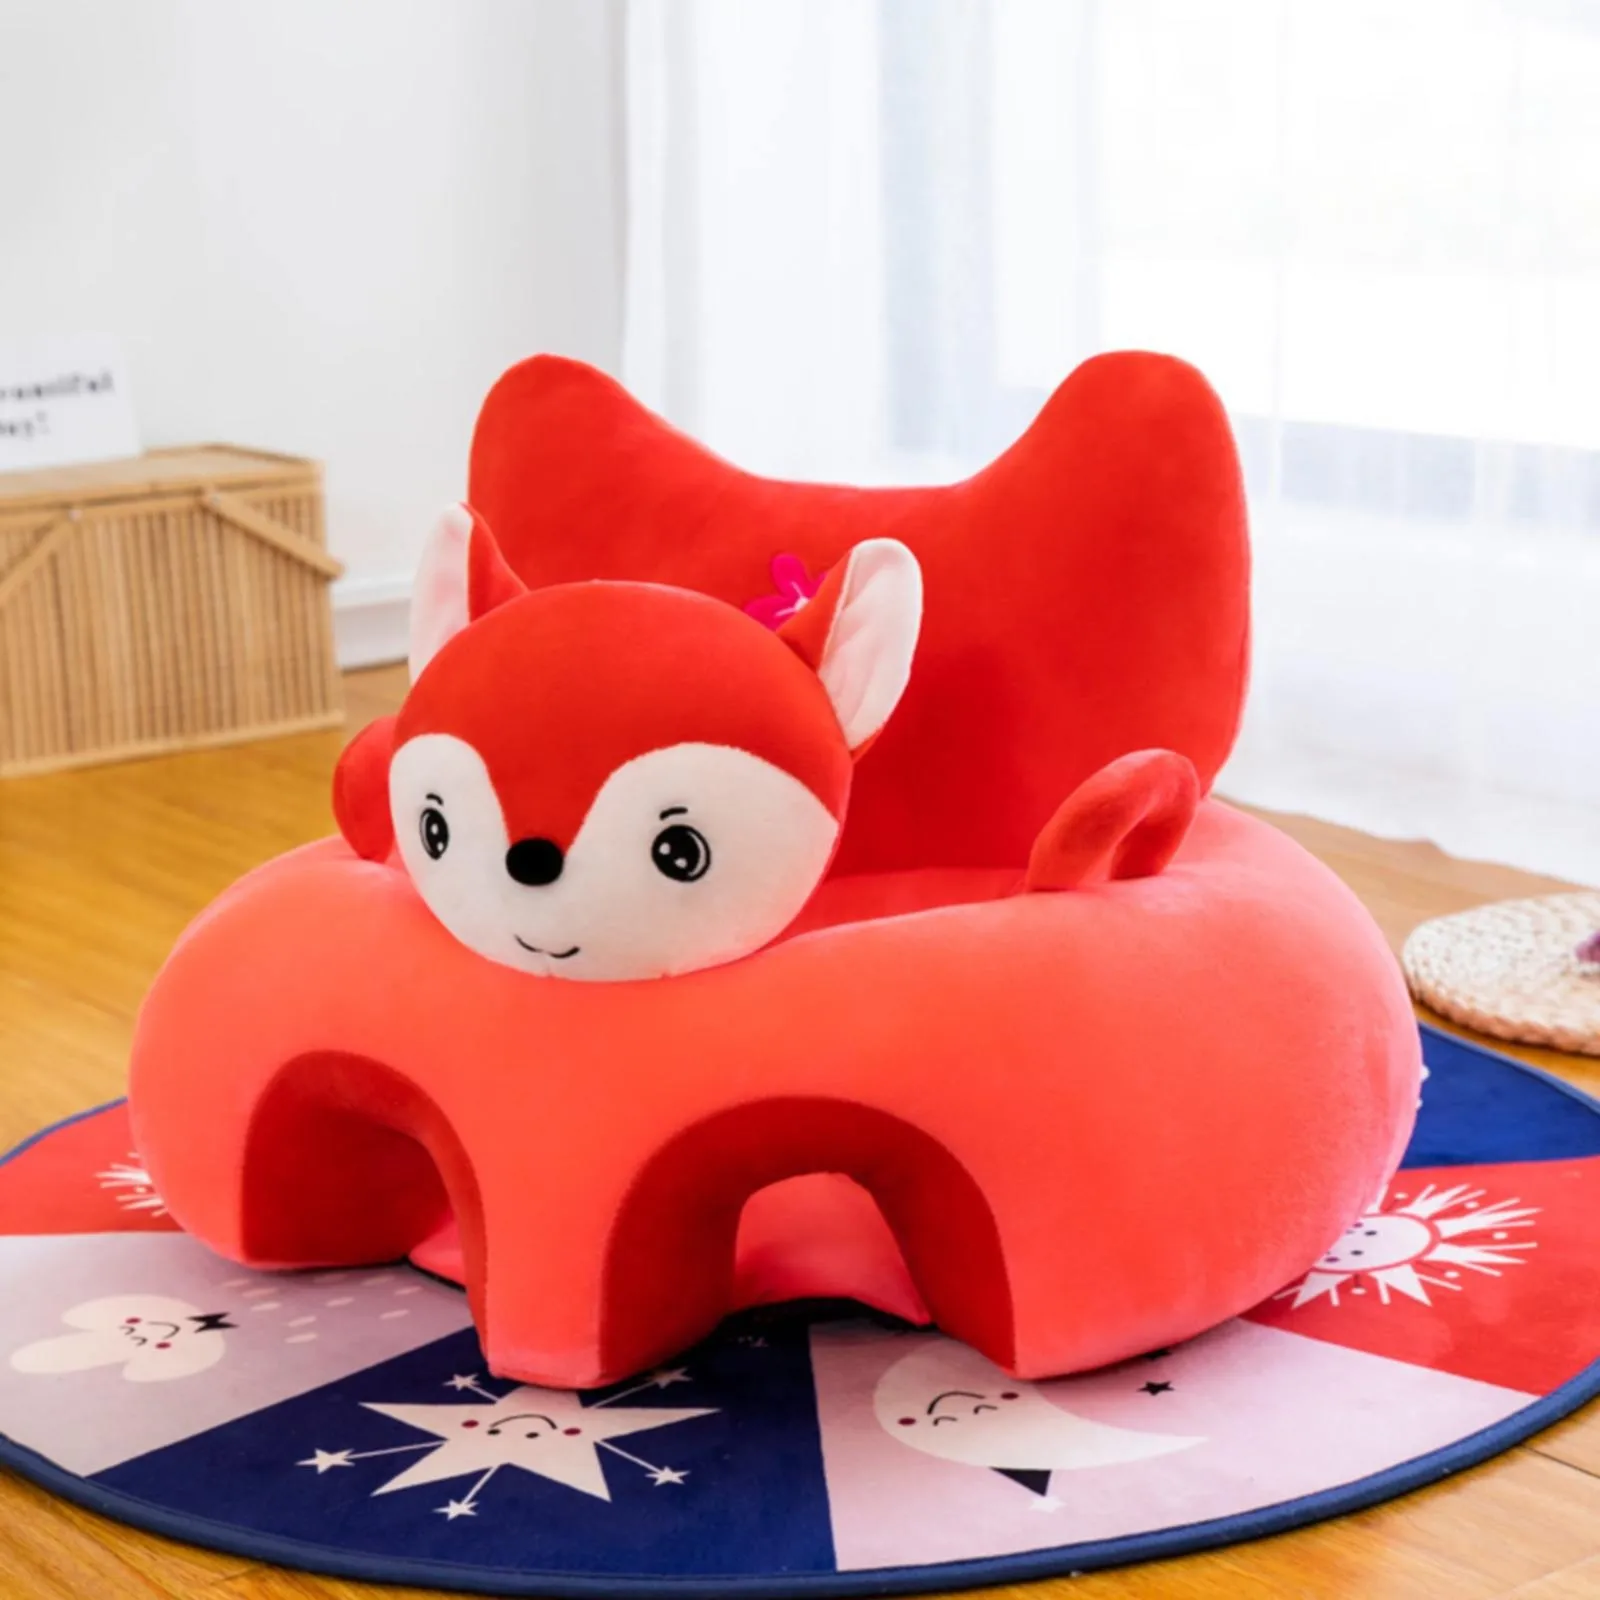 https://ae01.alicdn.com/kf/Sf617317840f243c59b7cc6871e0e7649n/Children-s-Sofa-Without-Filled-Cotton-Chair-Soft-Cartoon-Animals-Baby-Floor-Seat-Cushions-Memory-Foam.jpg